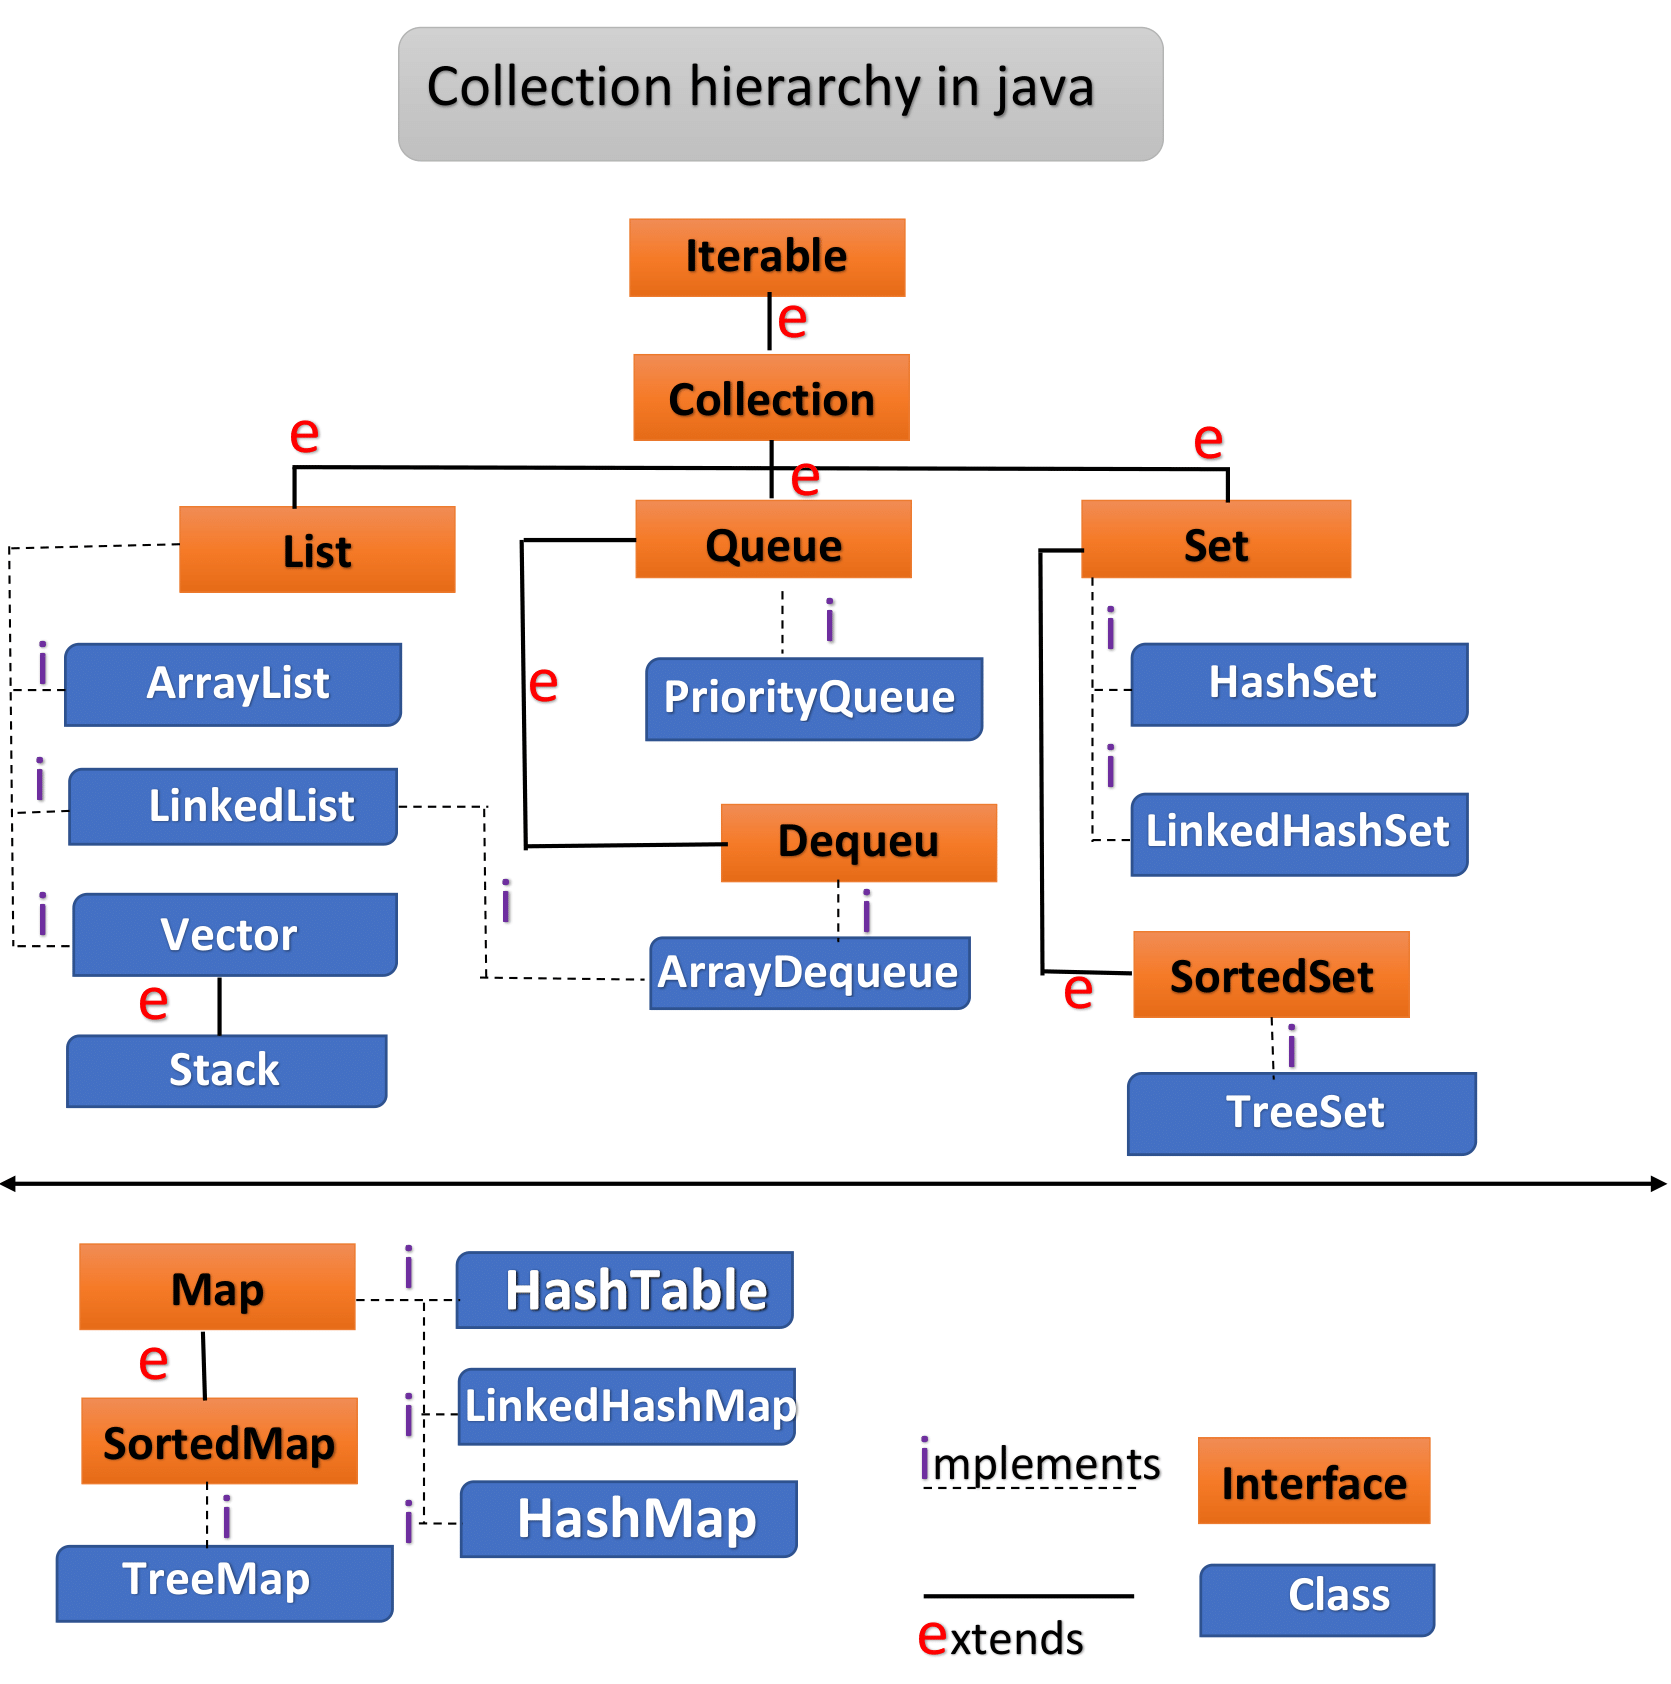 3. Collection hierarchy in java ( Part 2: Classes )